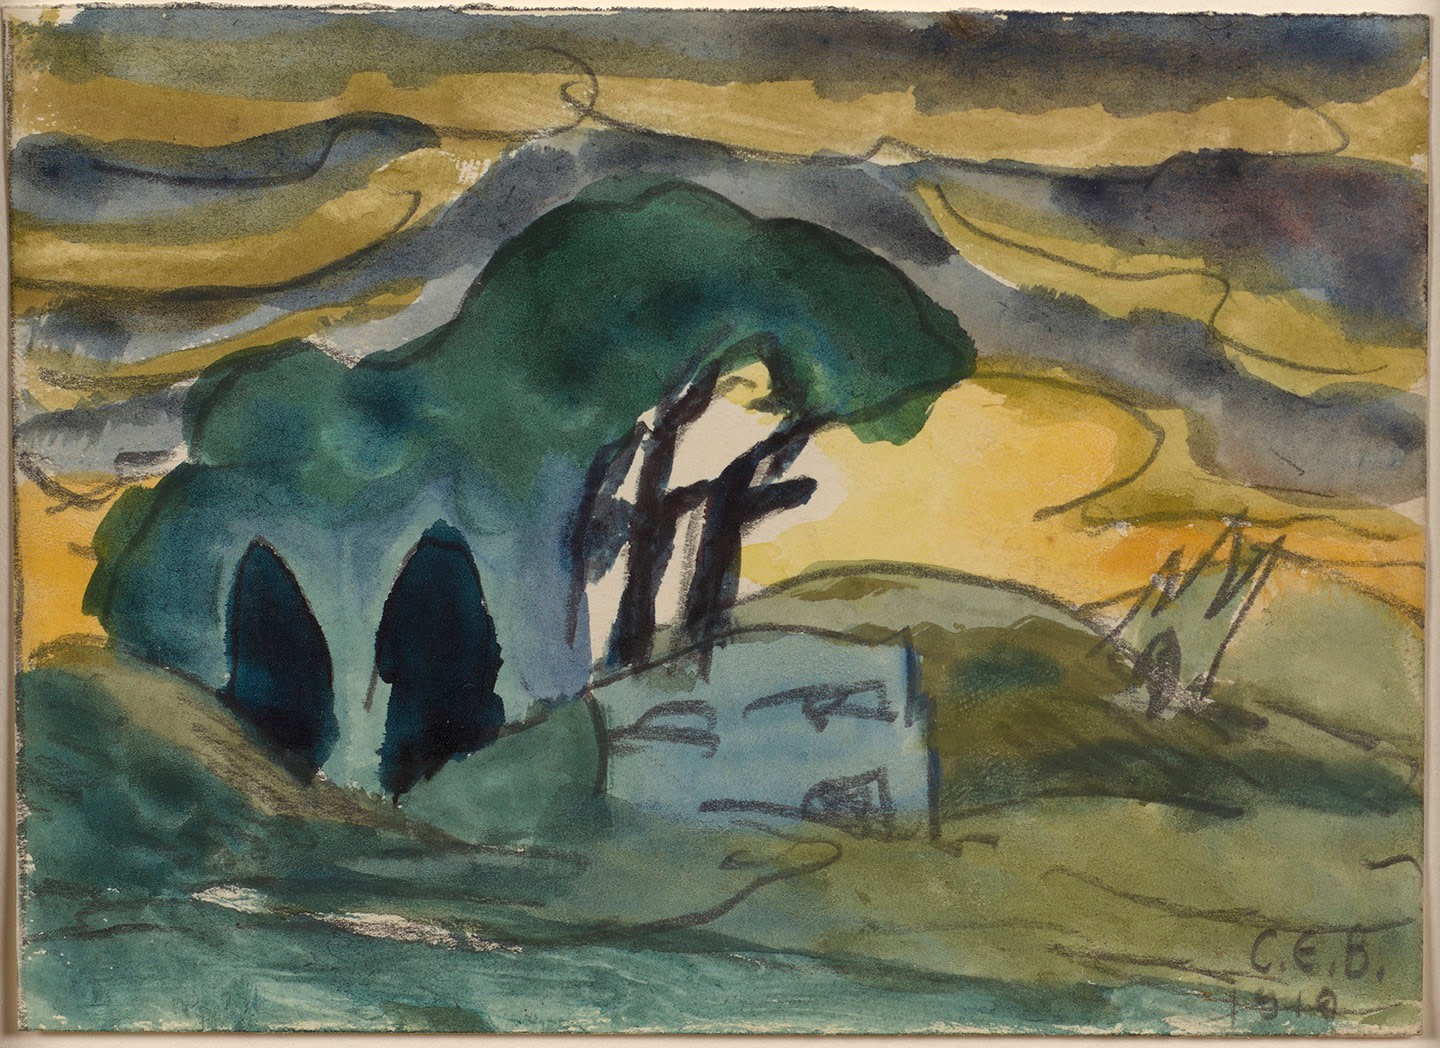 About the Artwork Charles Ephraim Burchfield (1893 1967)               Haunted Evening, 1919                                                                                   Watercolor and Pencil on Paper  3 ¾ X 5 ¼ In.  by Charles Burchfield